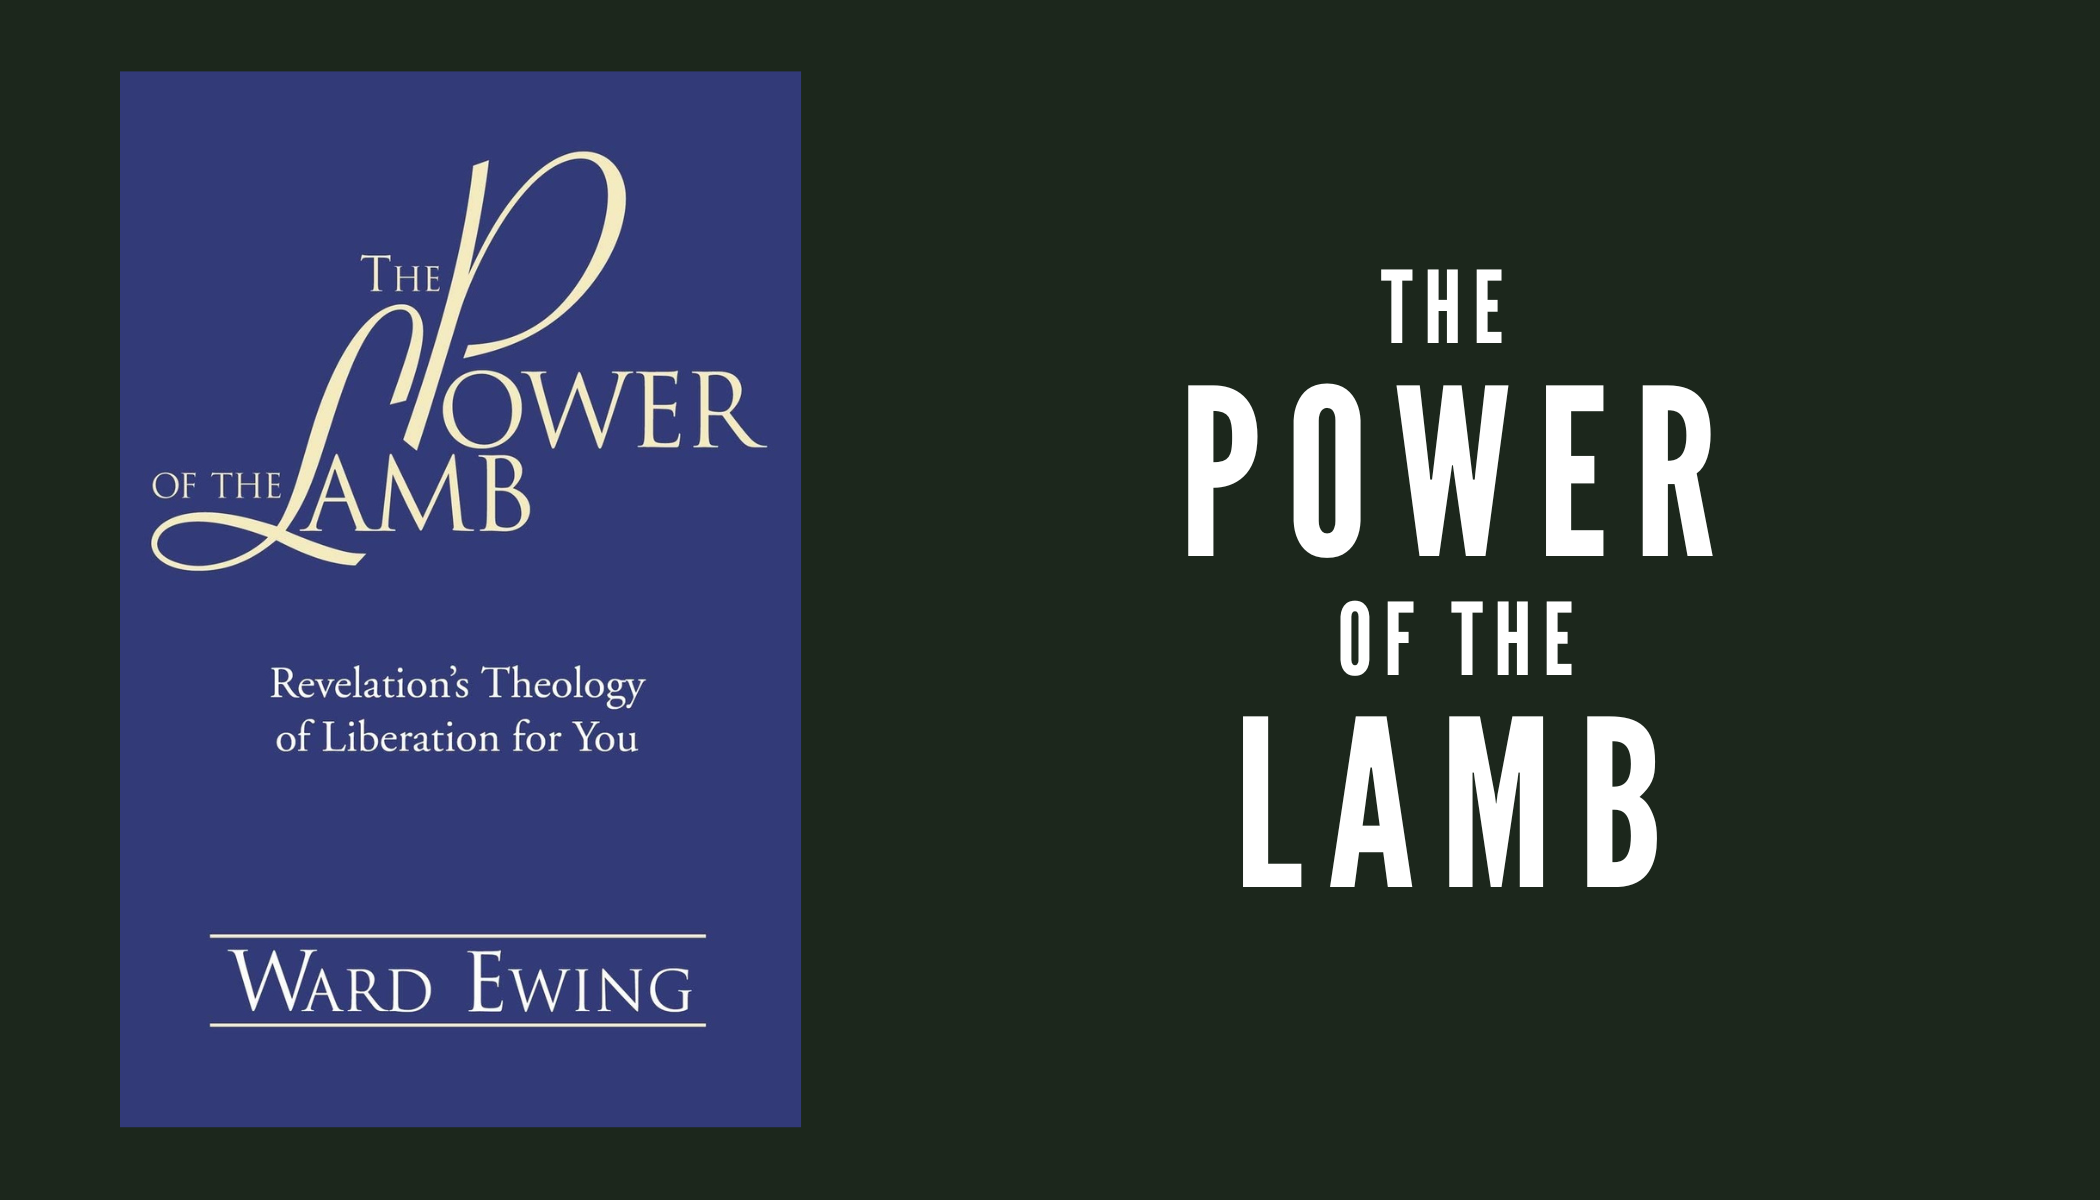 Adult Education Series: The Power of the Lamb